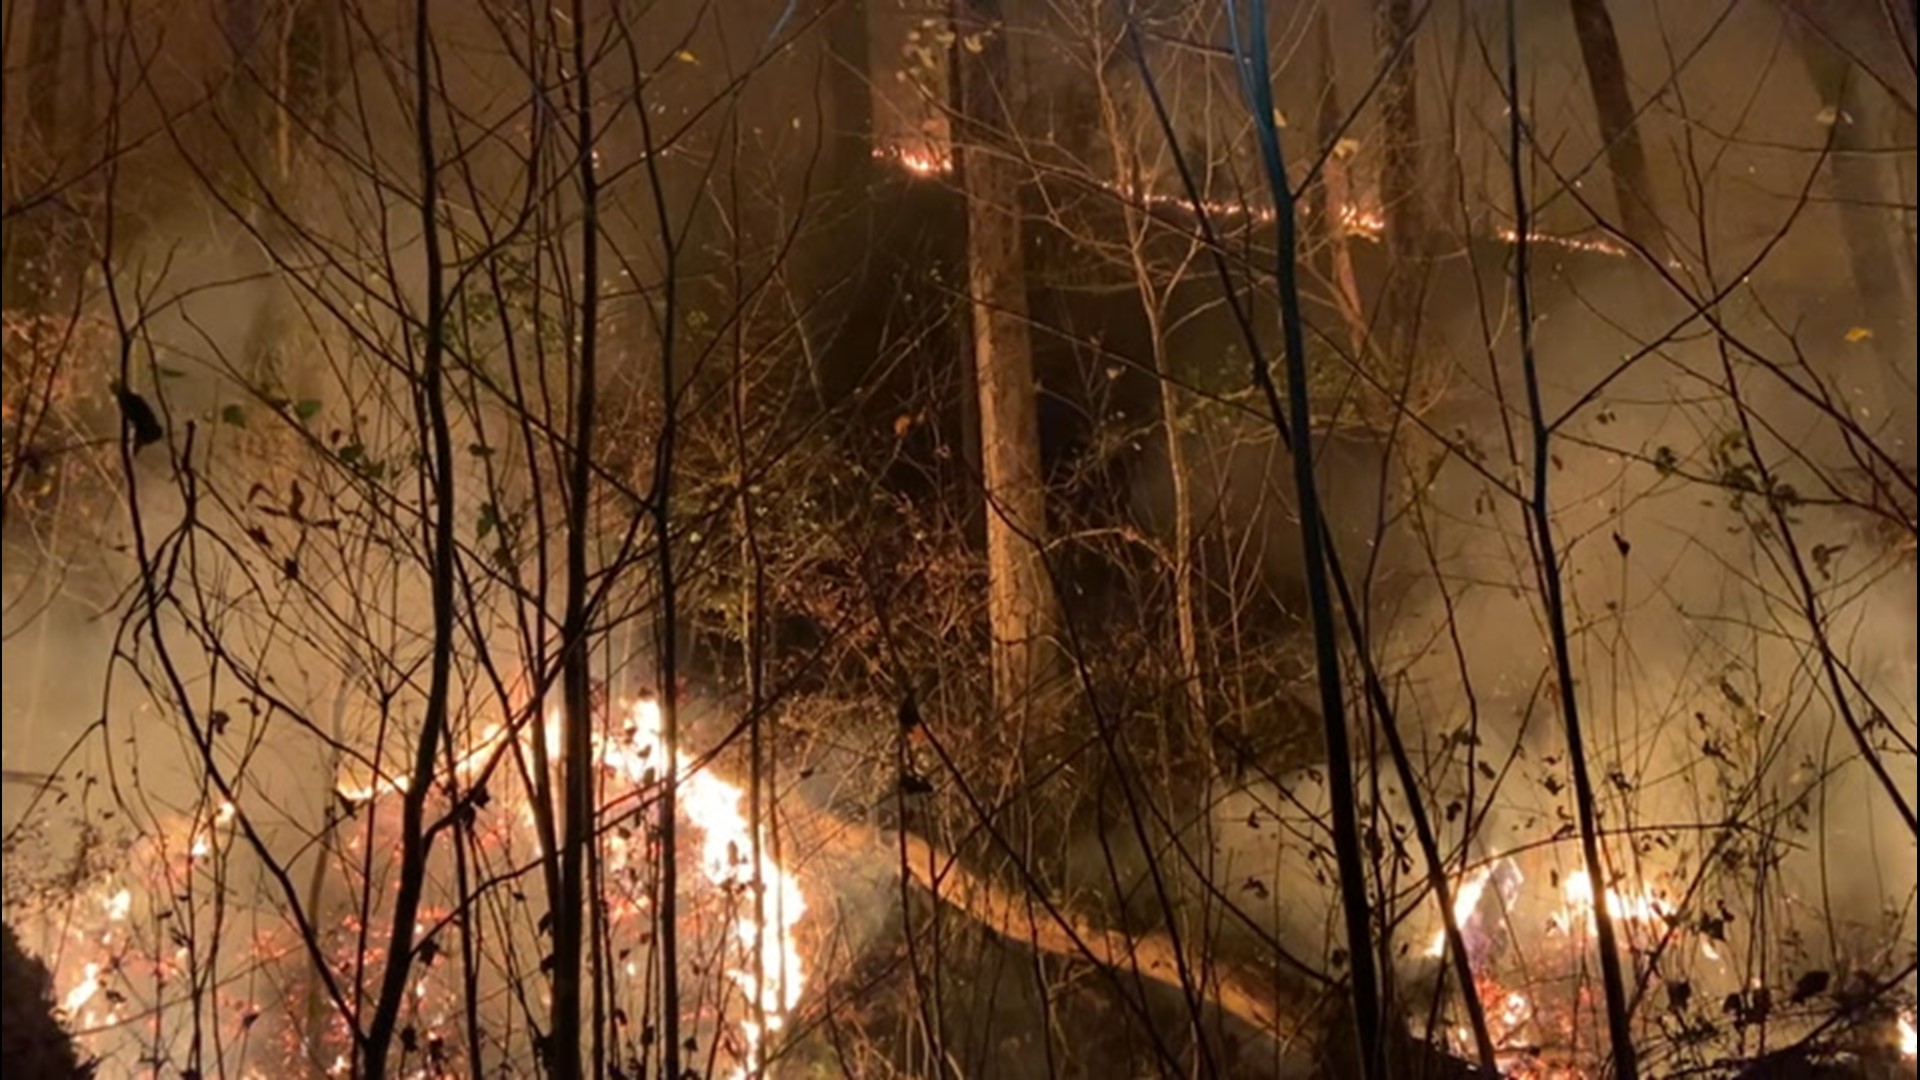 Officials in Tennessee say the Fentress County Hoodtown Fire is 100% contained as of Nov. 20, after crews performed back burning operations to remove fuel for the fire to burn.